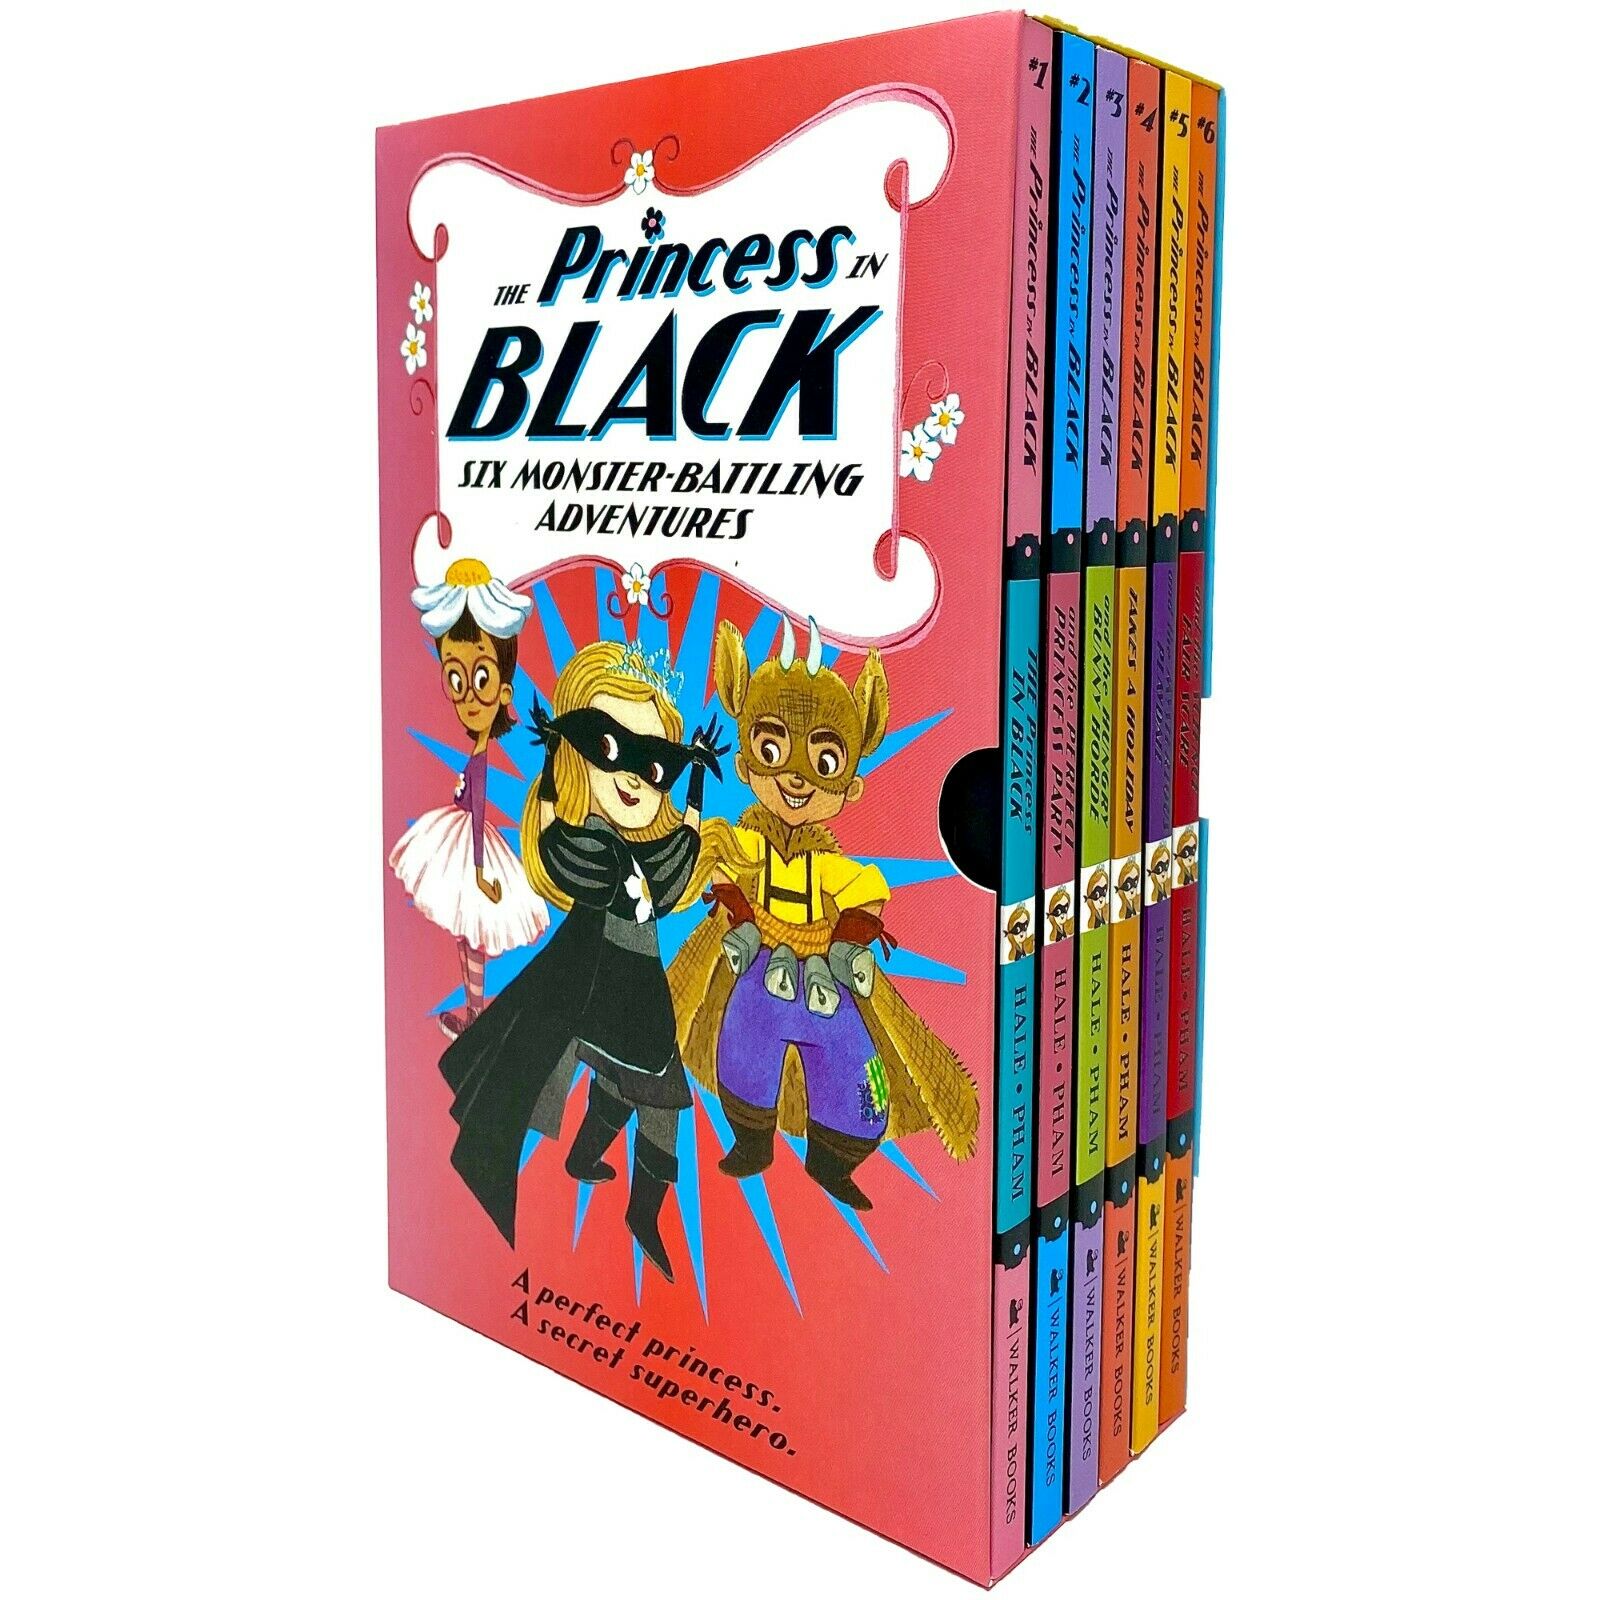 Adventures　in　The　Book　Dean　Box　The　Monster-Battling　Princess　Collection　Hale　Black　by　Shannon　Books　Set　Bundle